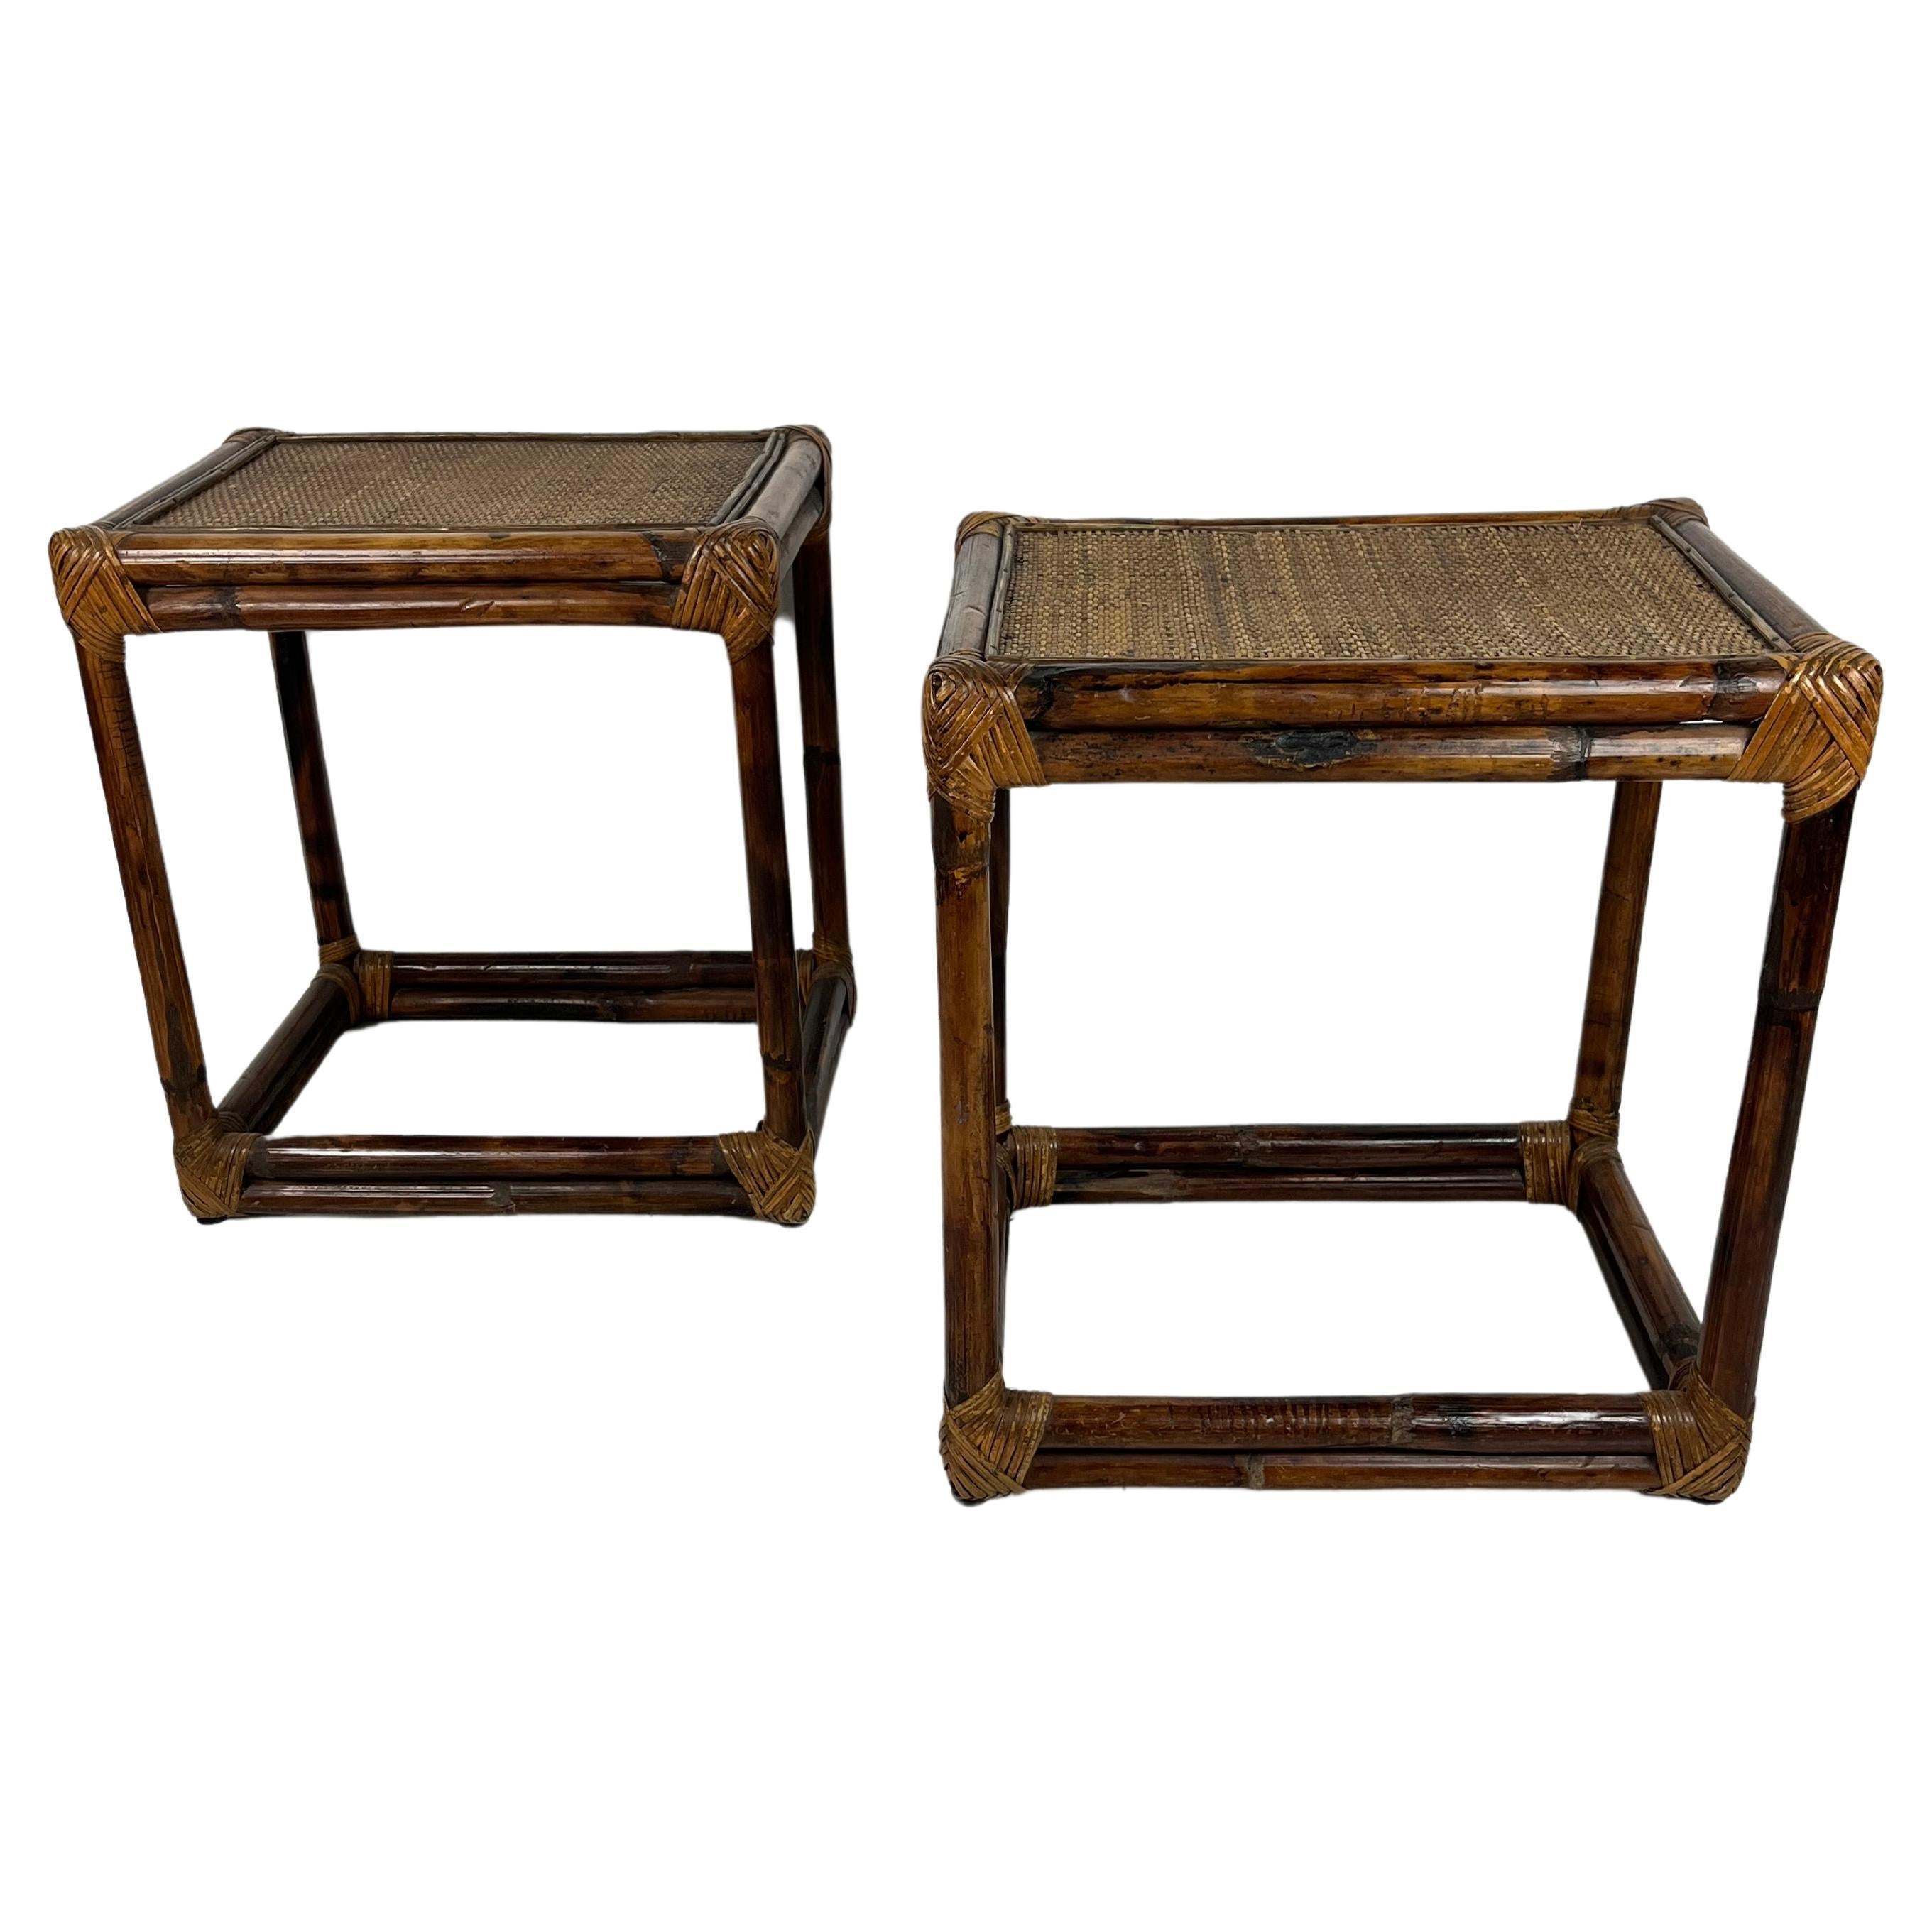 Pair of Bamboo Bedside Tables, Italy, 1960s